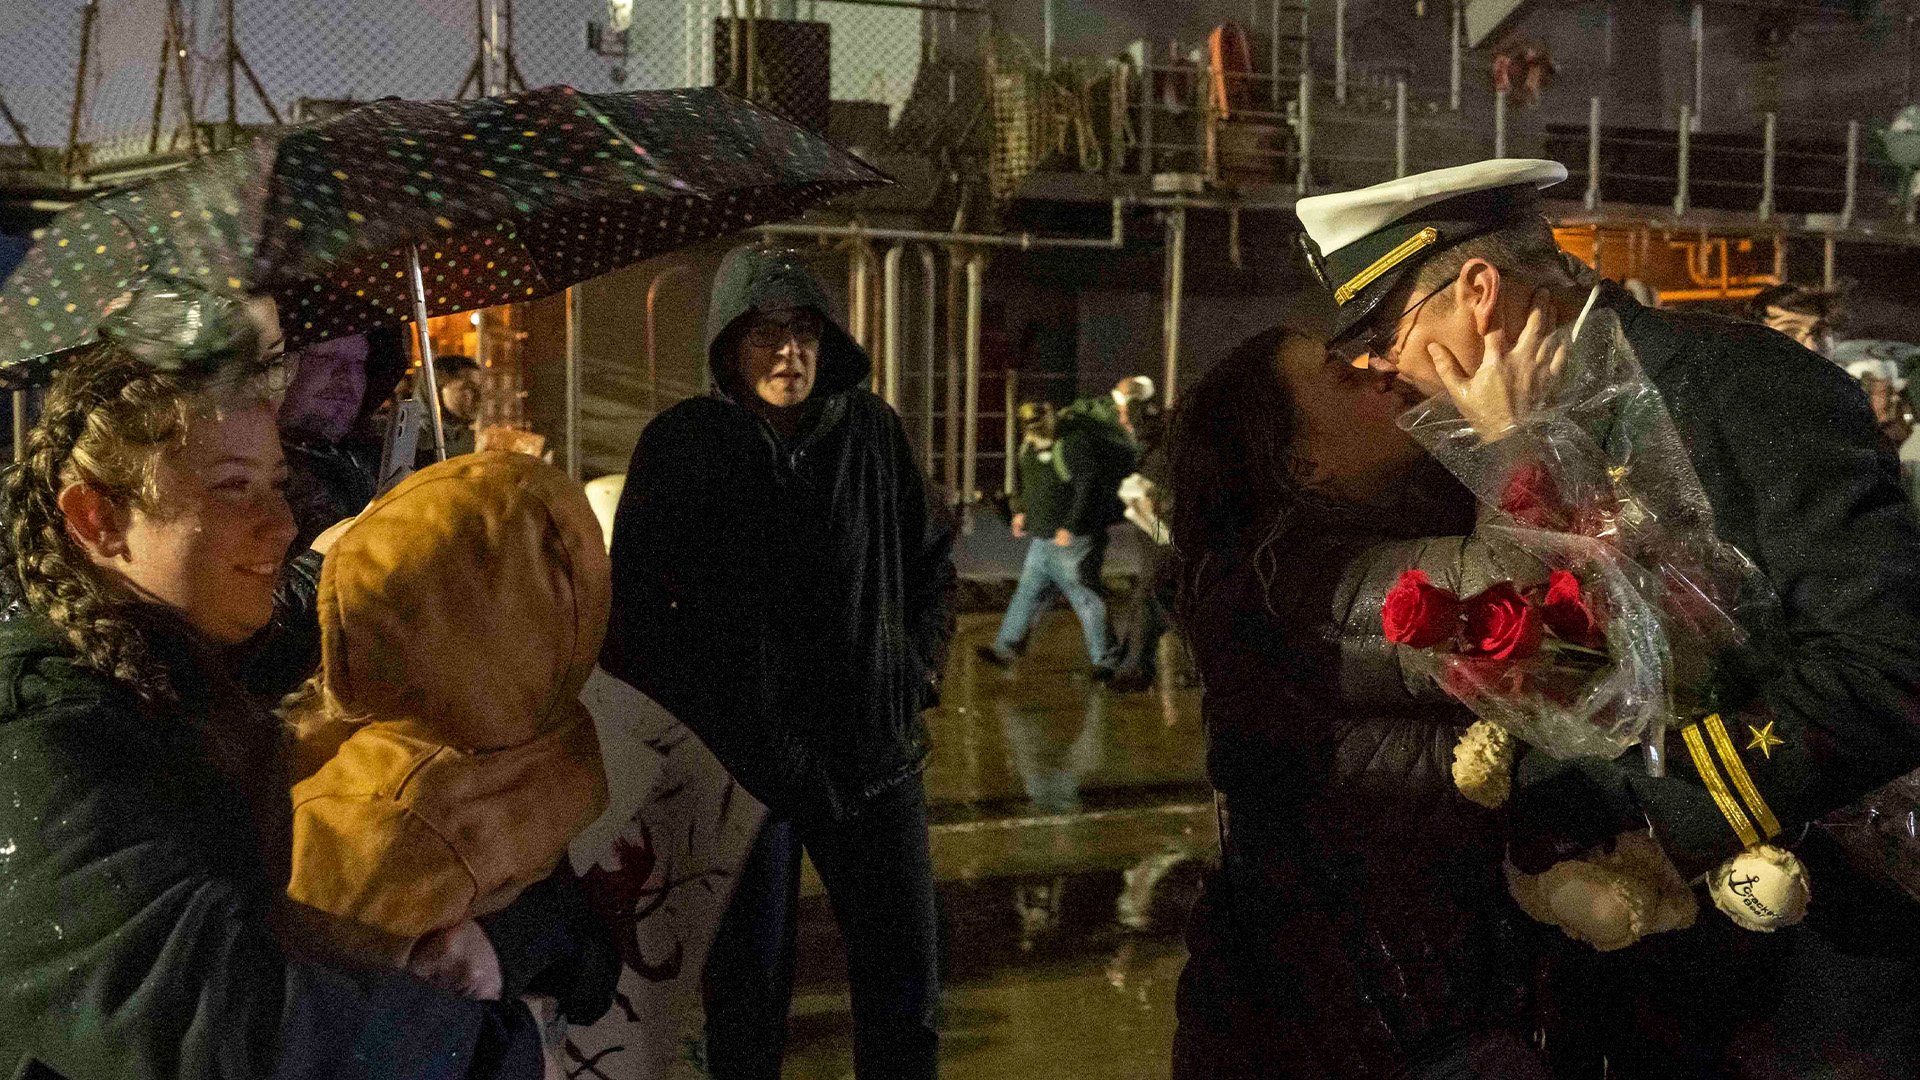 A dark and soggy Naval Station Norfolk greeted the officers and crew from the guided-missile destroyer Forrest Sherman when they returned to their Virginia homeport on Dec. 22, 2022, following eight months at sea. US Navy photo by Mass Communication Specialist 2nd Class Anderson W. Branch.